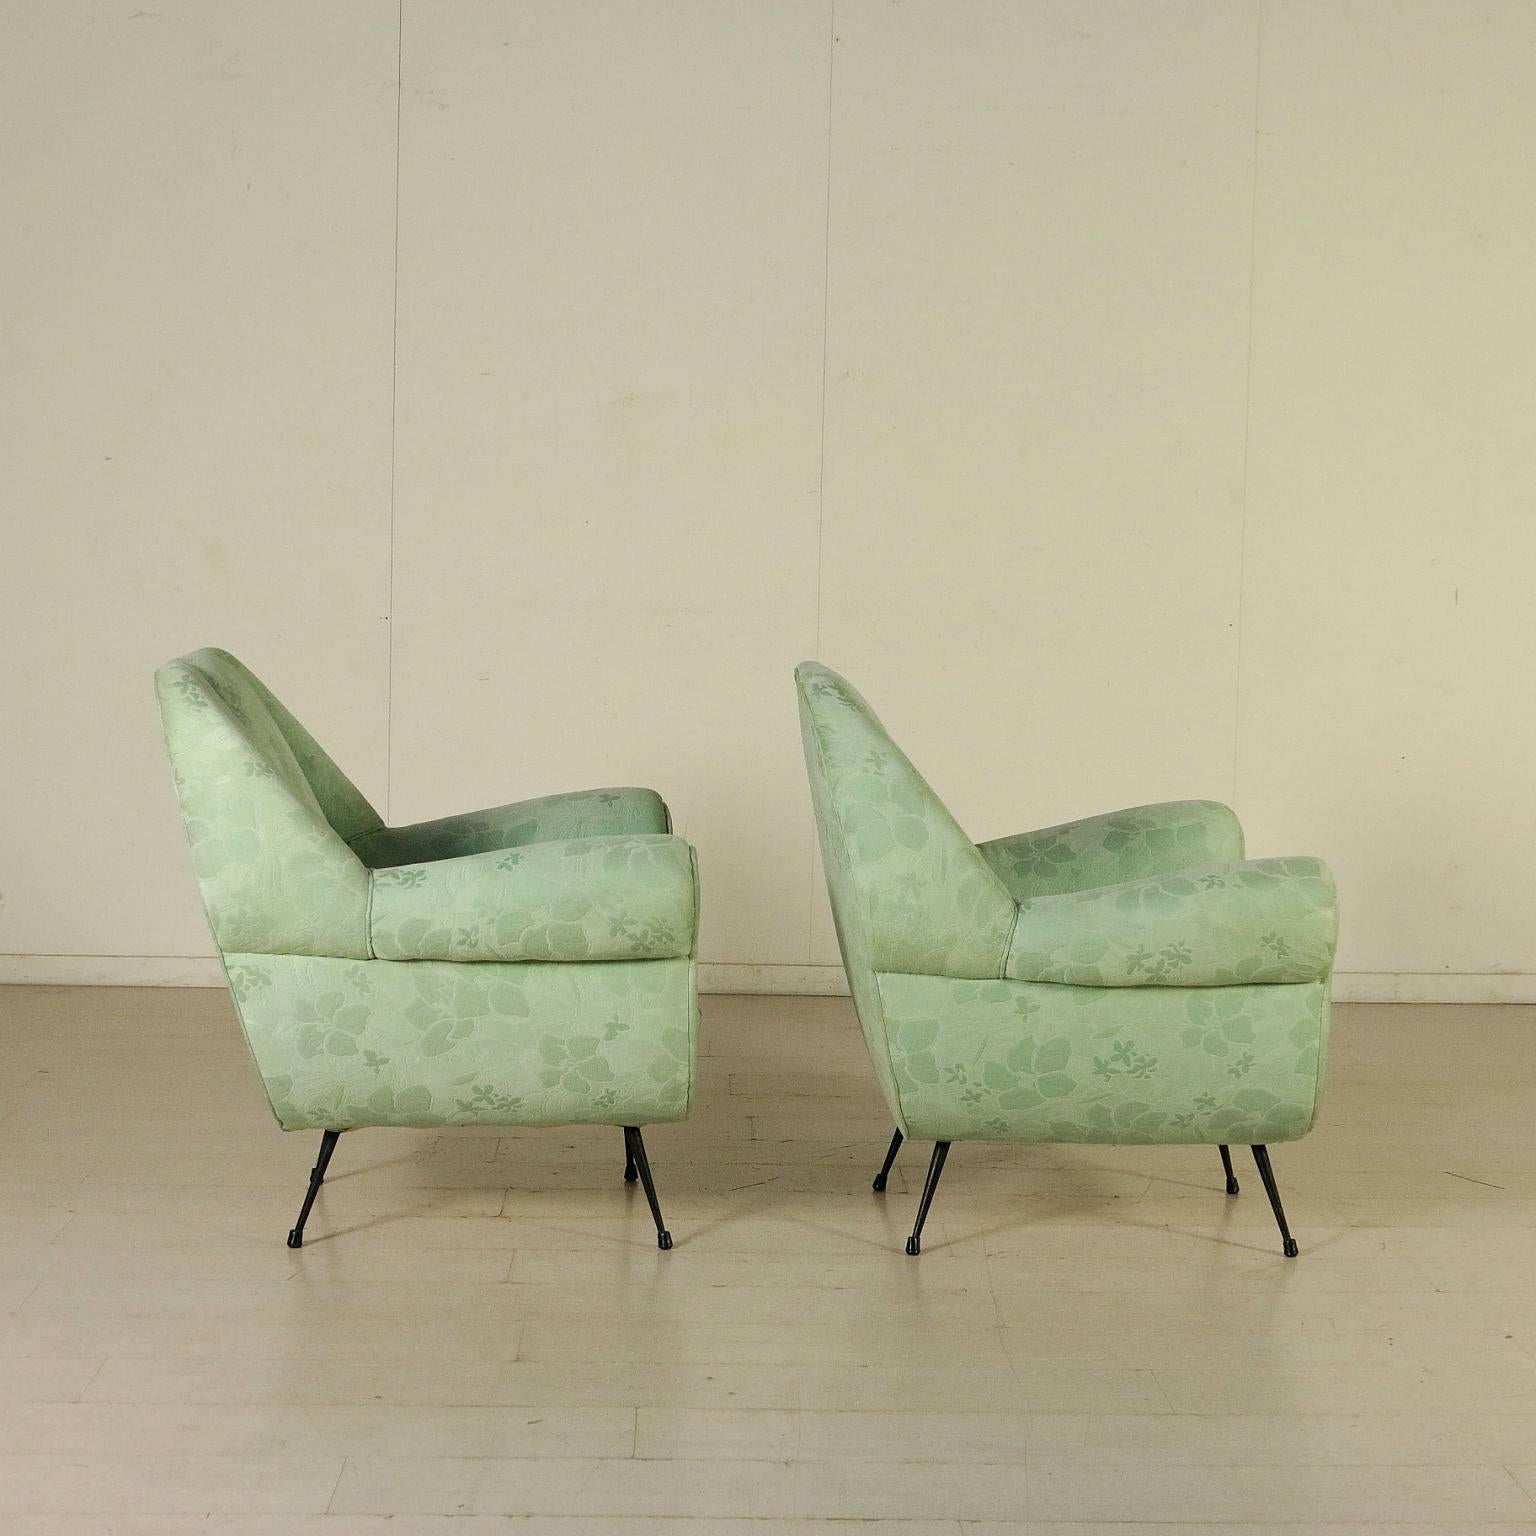 Upholstery Pair of Armchairs Foam Spring Fabric Vintage, Italy, 1950s-1960s